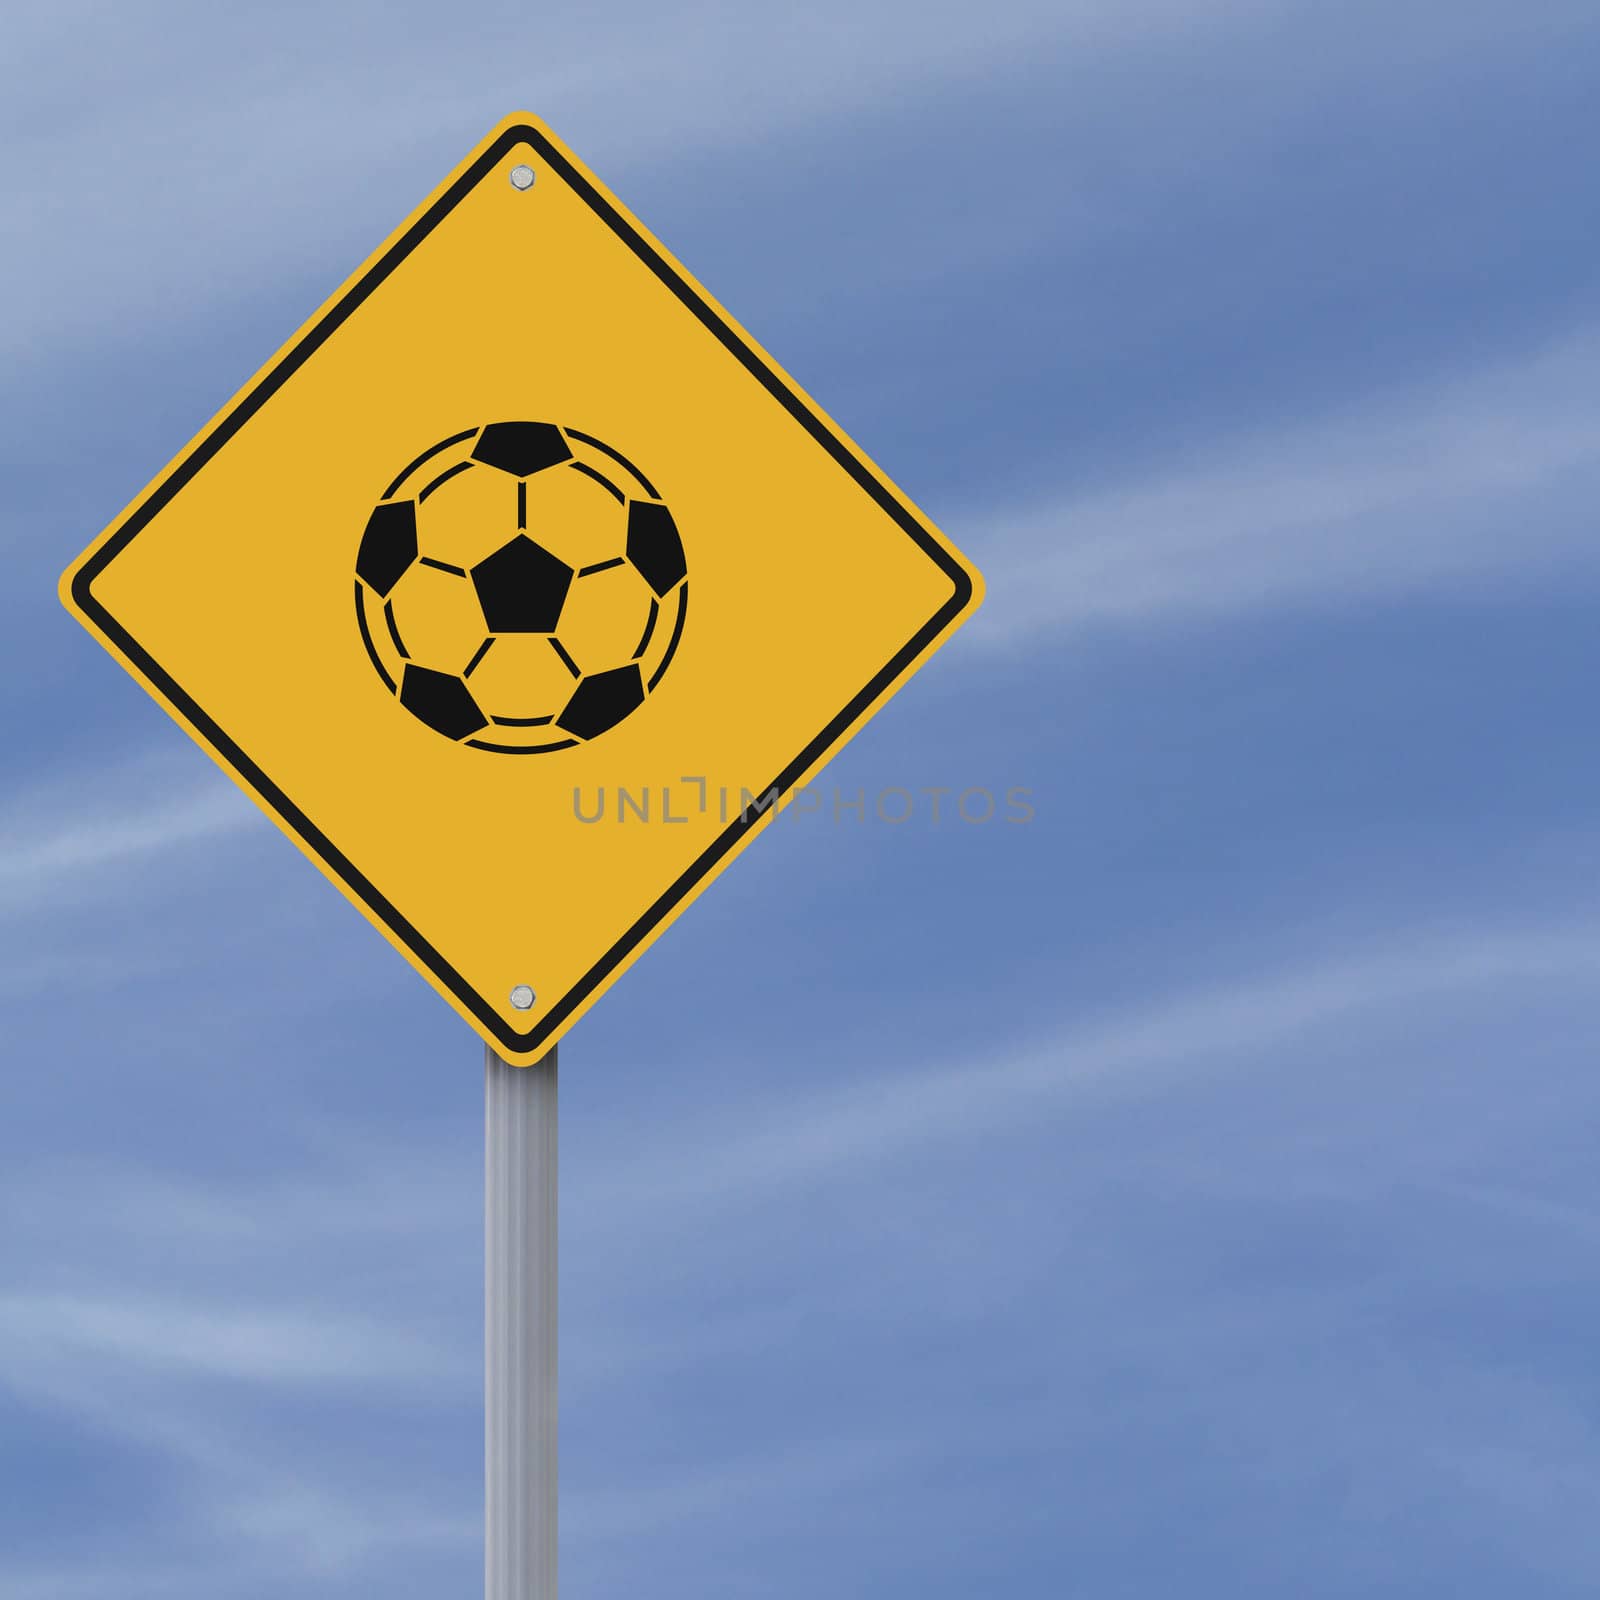 A road sign with a football symbol